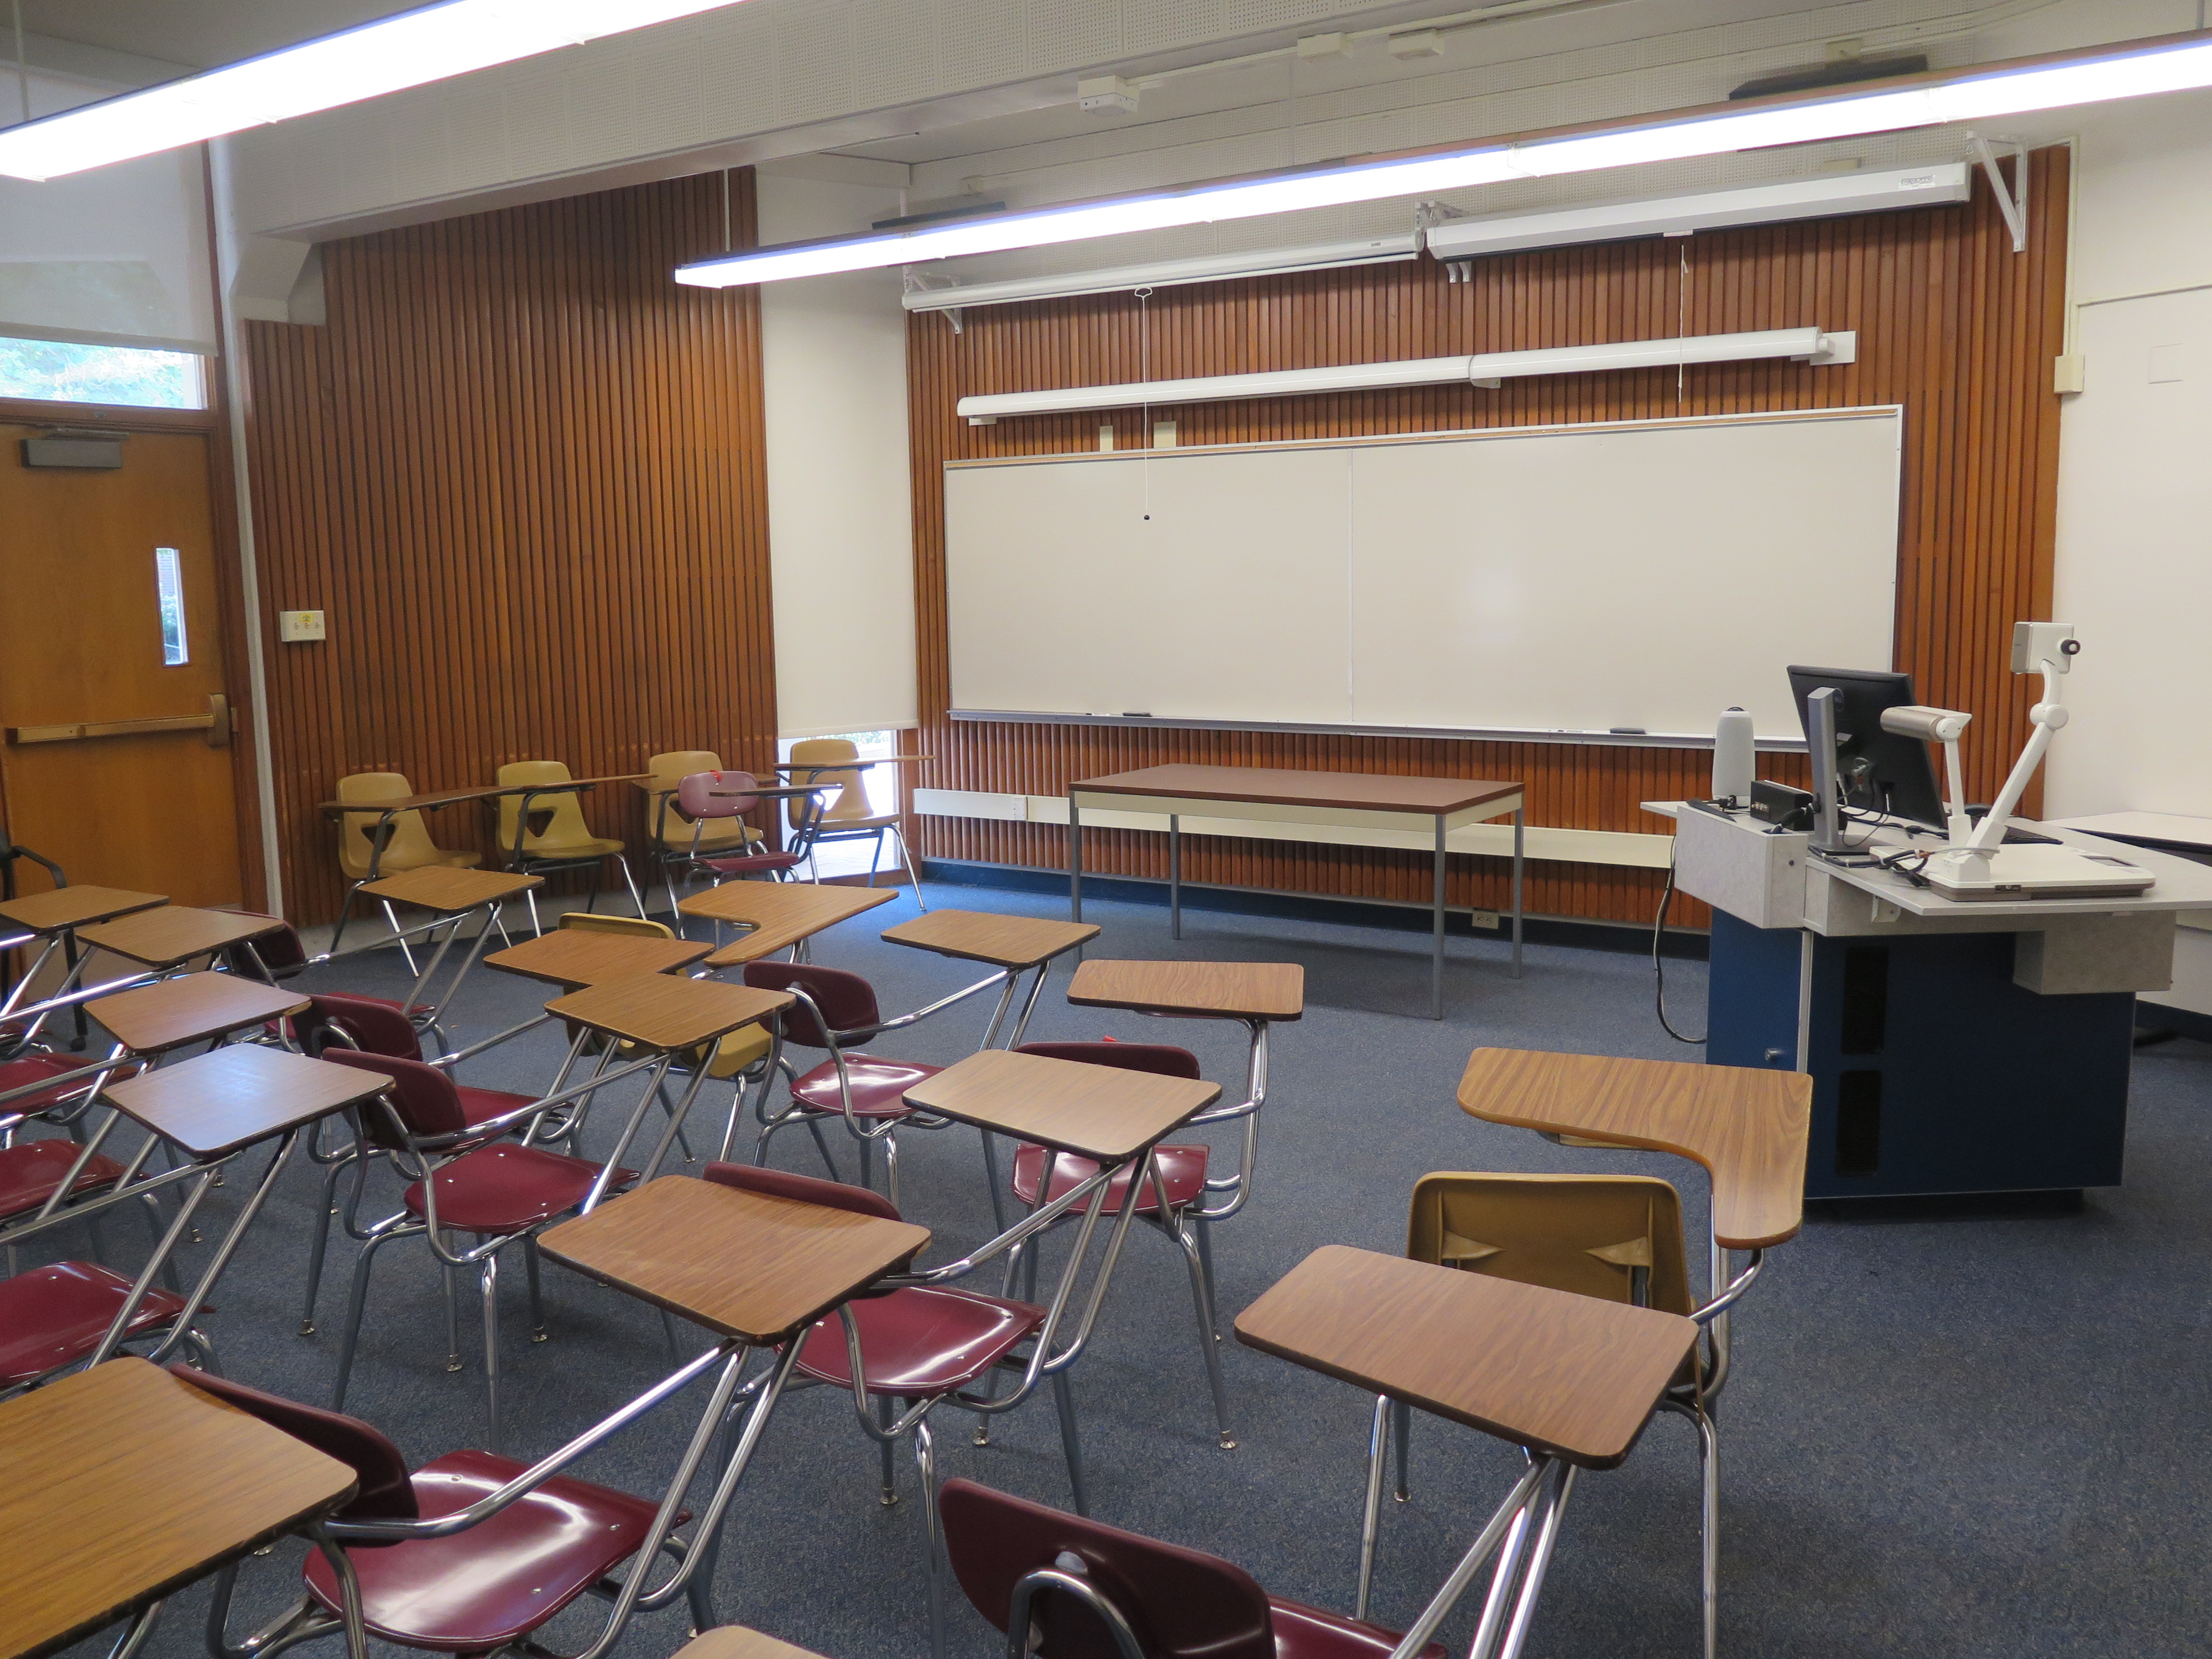 This room contains carpet floor, woods desks connected to chairs, a whiteboard at the front of the room and a podium 